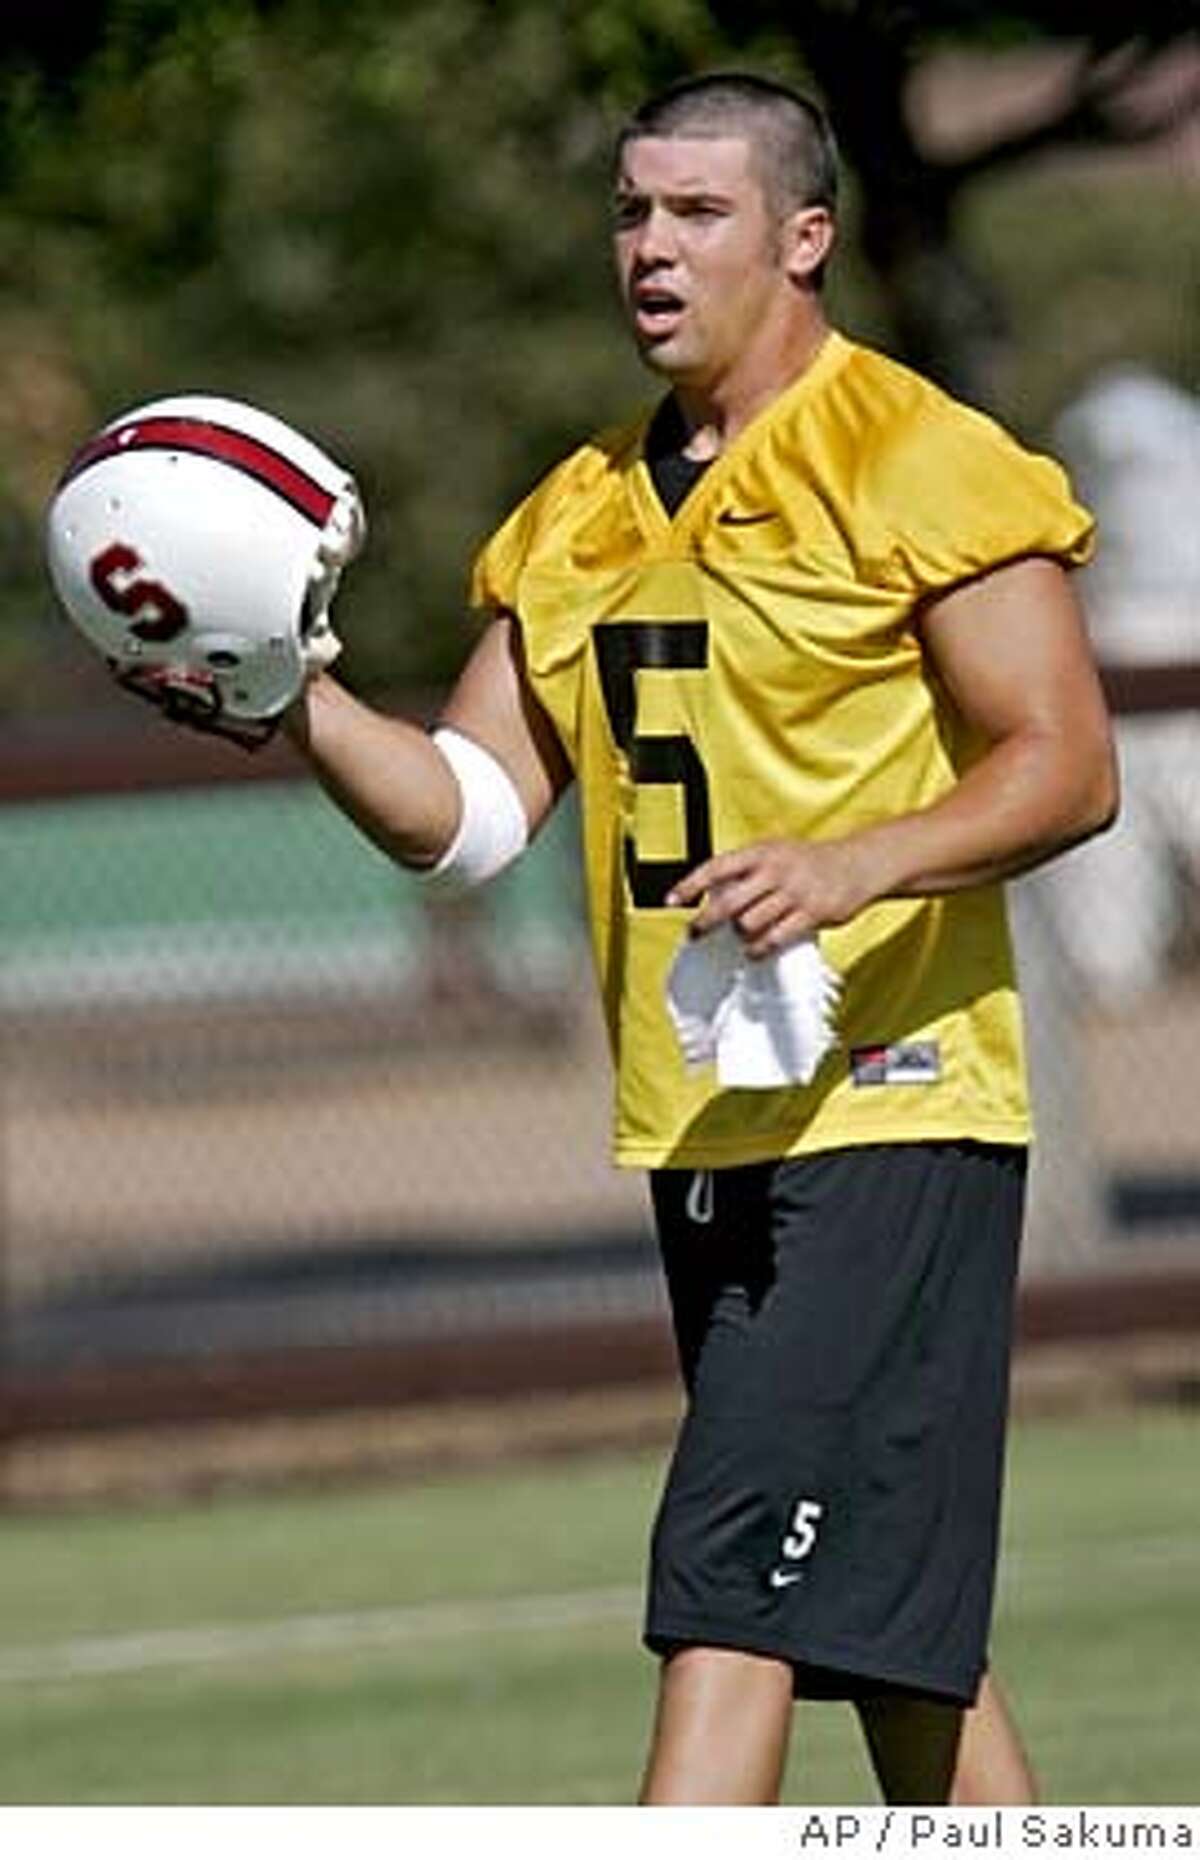 ** ADVANCE FOR WEEKEND EDITIONS, AUG. 12-13 ** Stanford quarterback Trent Edwards takes off his helmet during practice in Stanford, Calif., Tuesday, Aug. 8, 2006. Stanford is preparing for the Pac-10 football season. (AP Photo/Paul Sakuma) ** ADVANCE FOR WEEKEND EDITIONS, AUG. 12-13 **